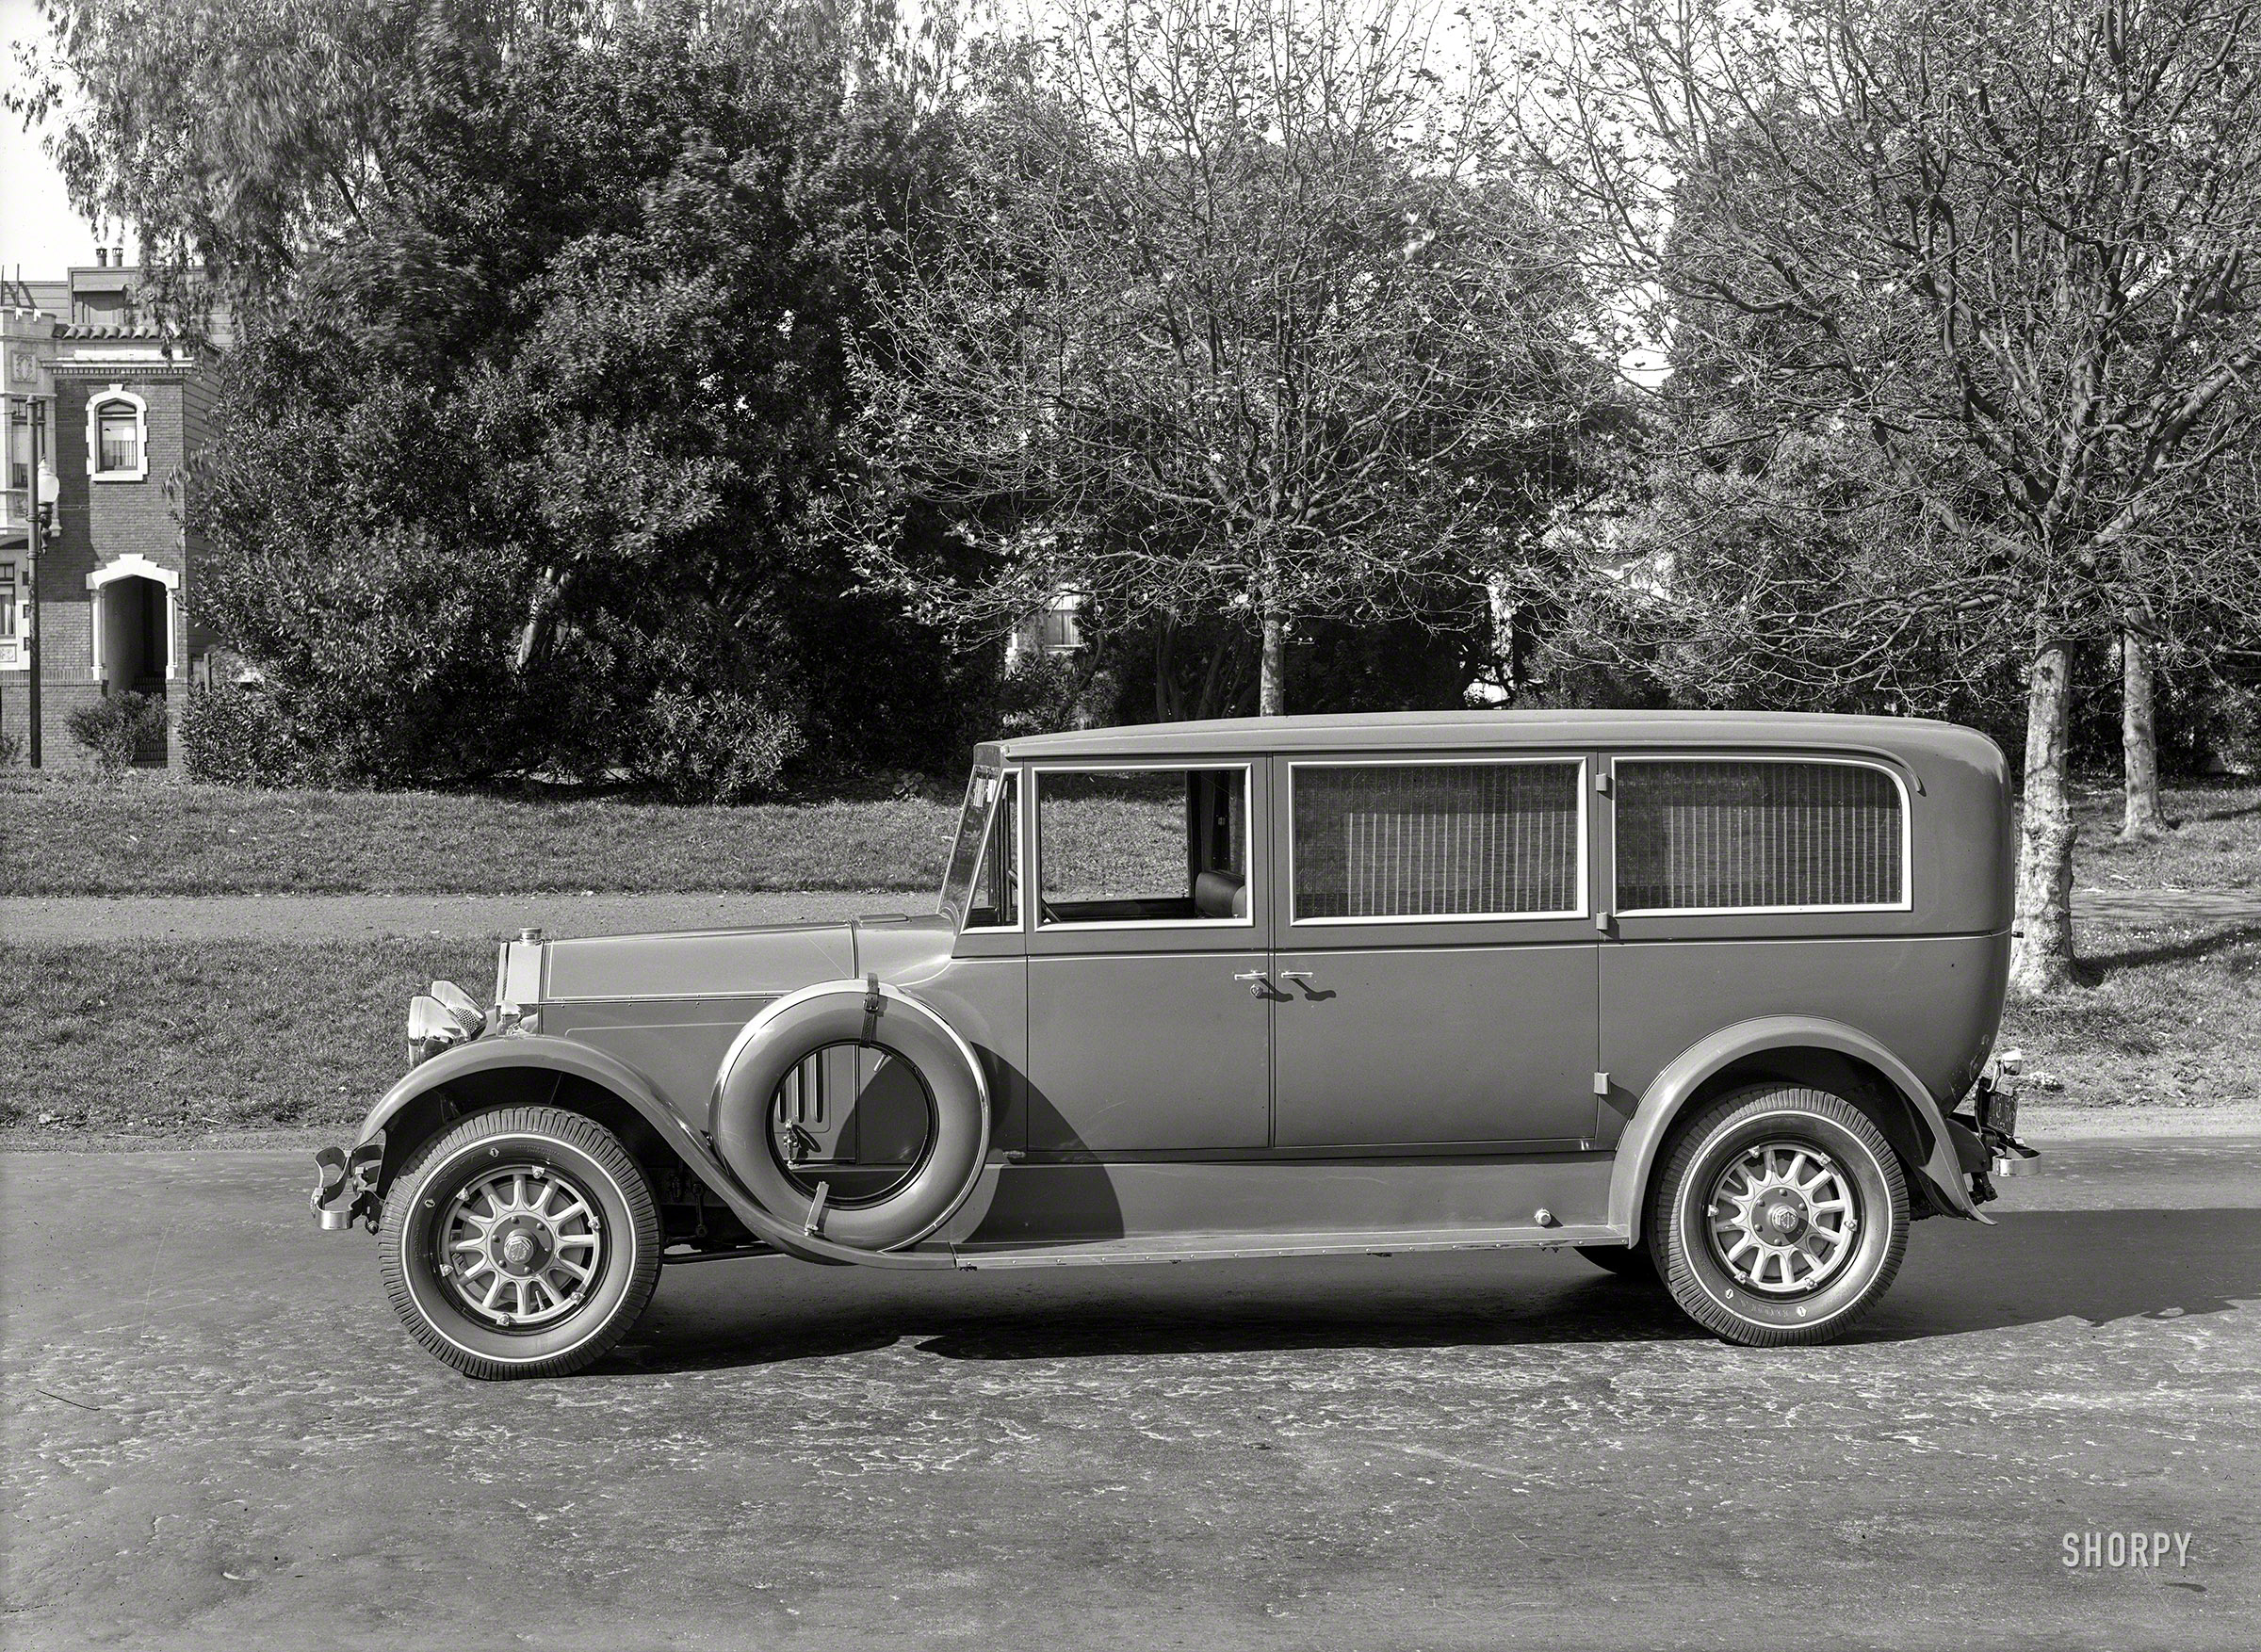 San Francisco circa 1931. "Pierce-Arrow limousine." Latest entry in the Shorpy File of Funereally Funky Phaetons. 5x7 glass negative by Chris Helin. View full size.